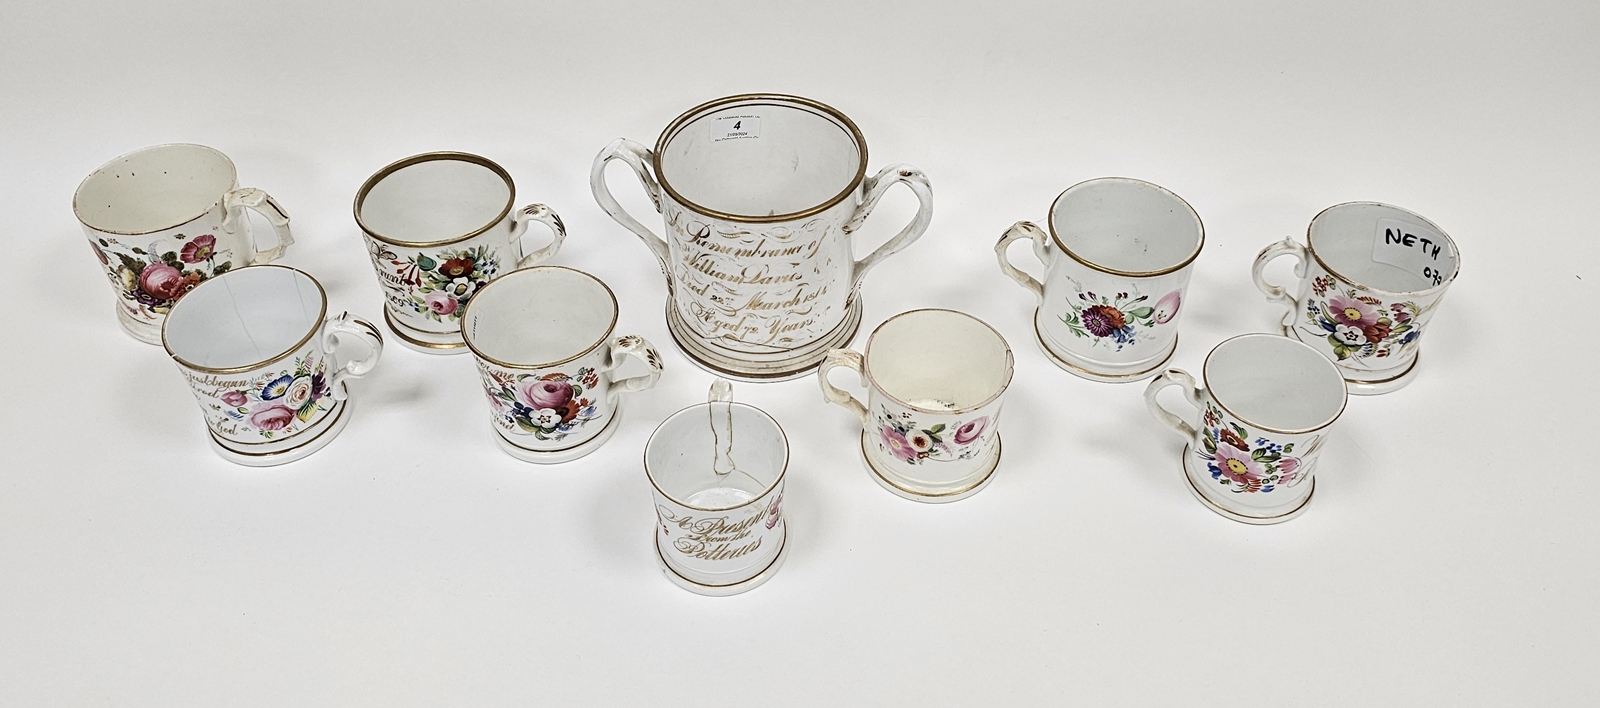 Collection of Staffordshire porcelain named mugs, some named and dated others inscribed with verses, - Image 2 of 2